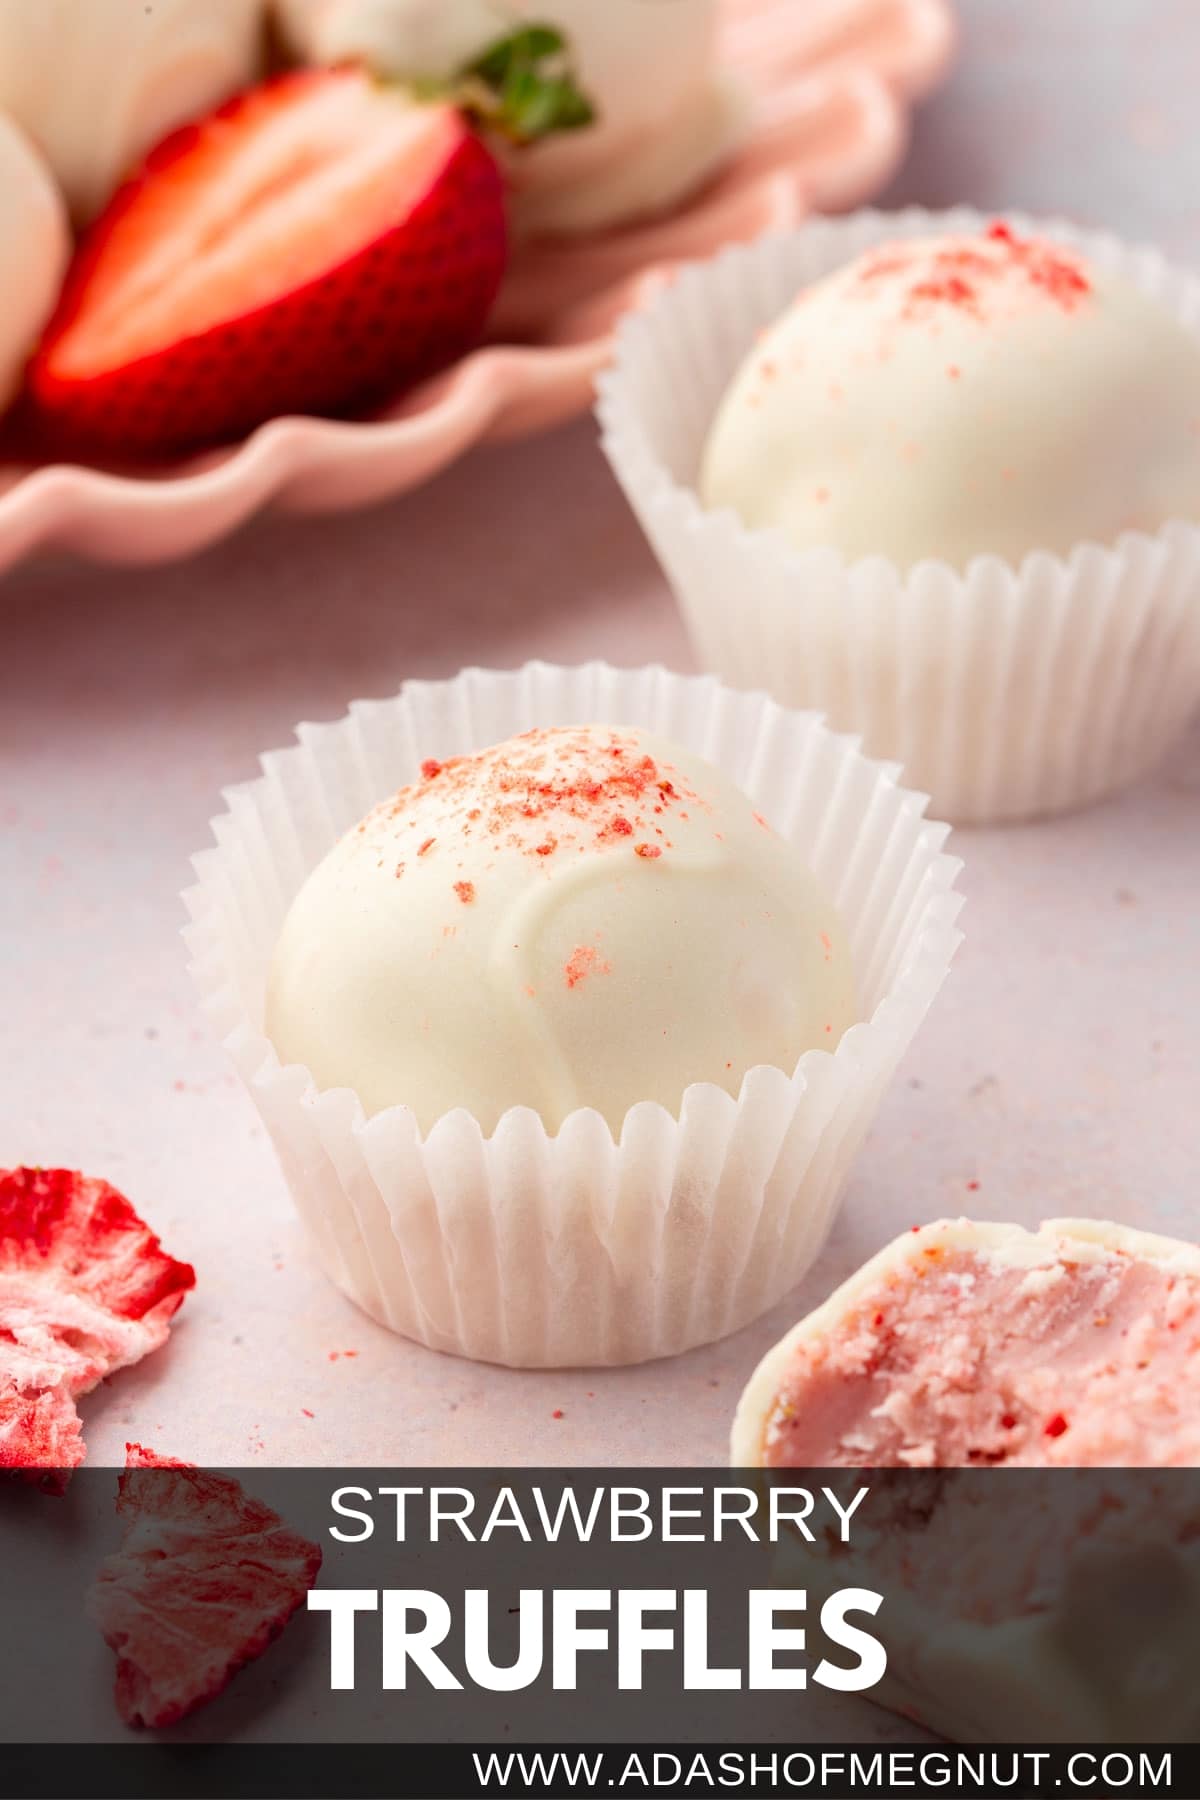 Two white chocolate strawberry truffles in paper cups with a plate of additional truffles and fresh strawberries in the background.